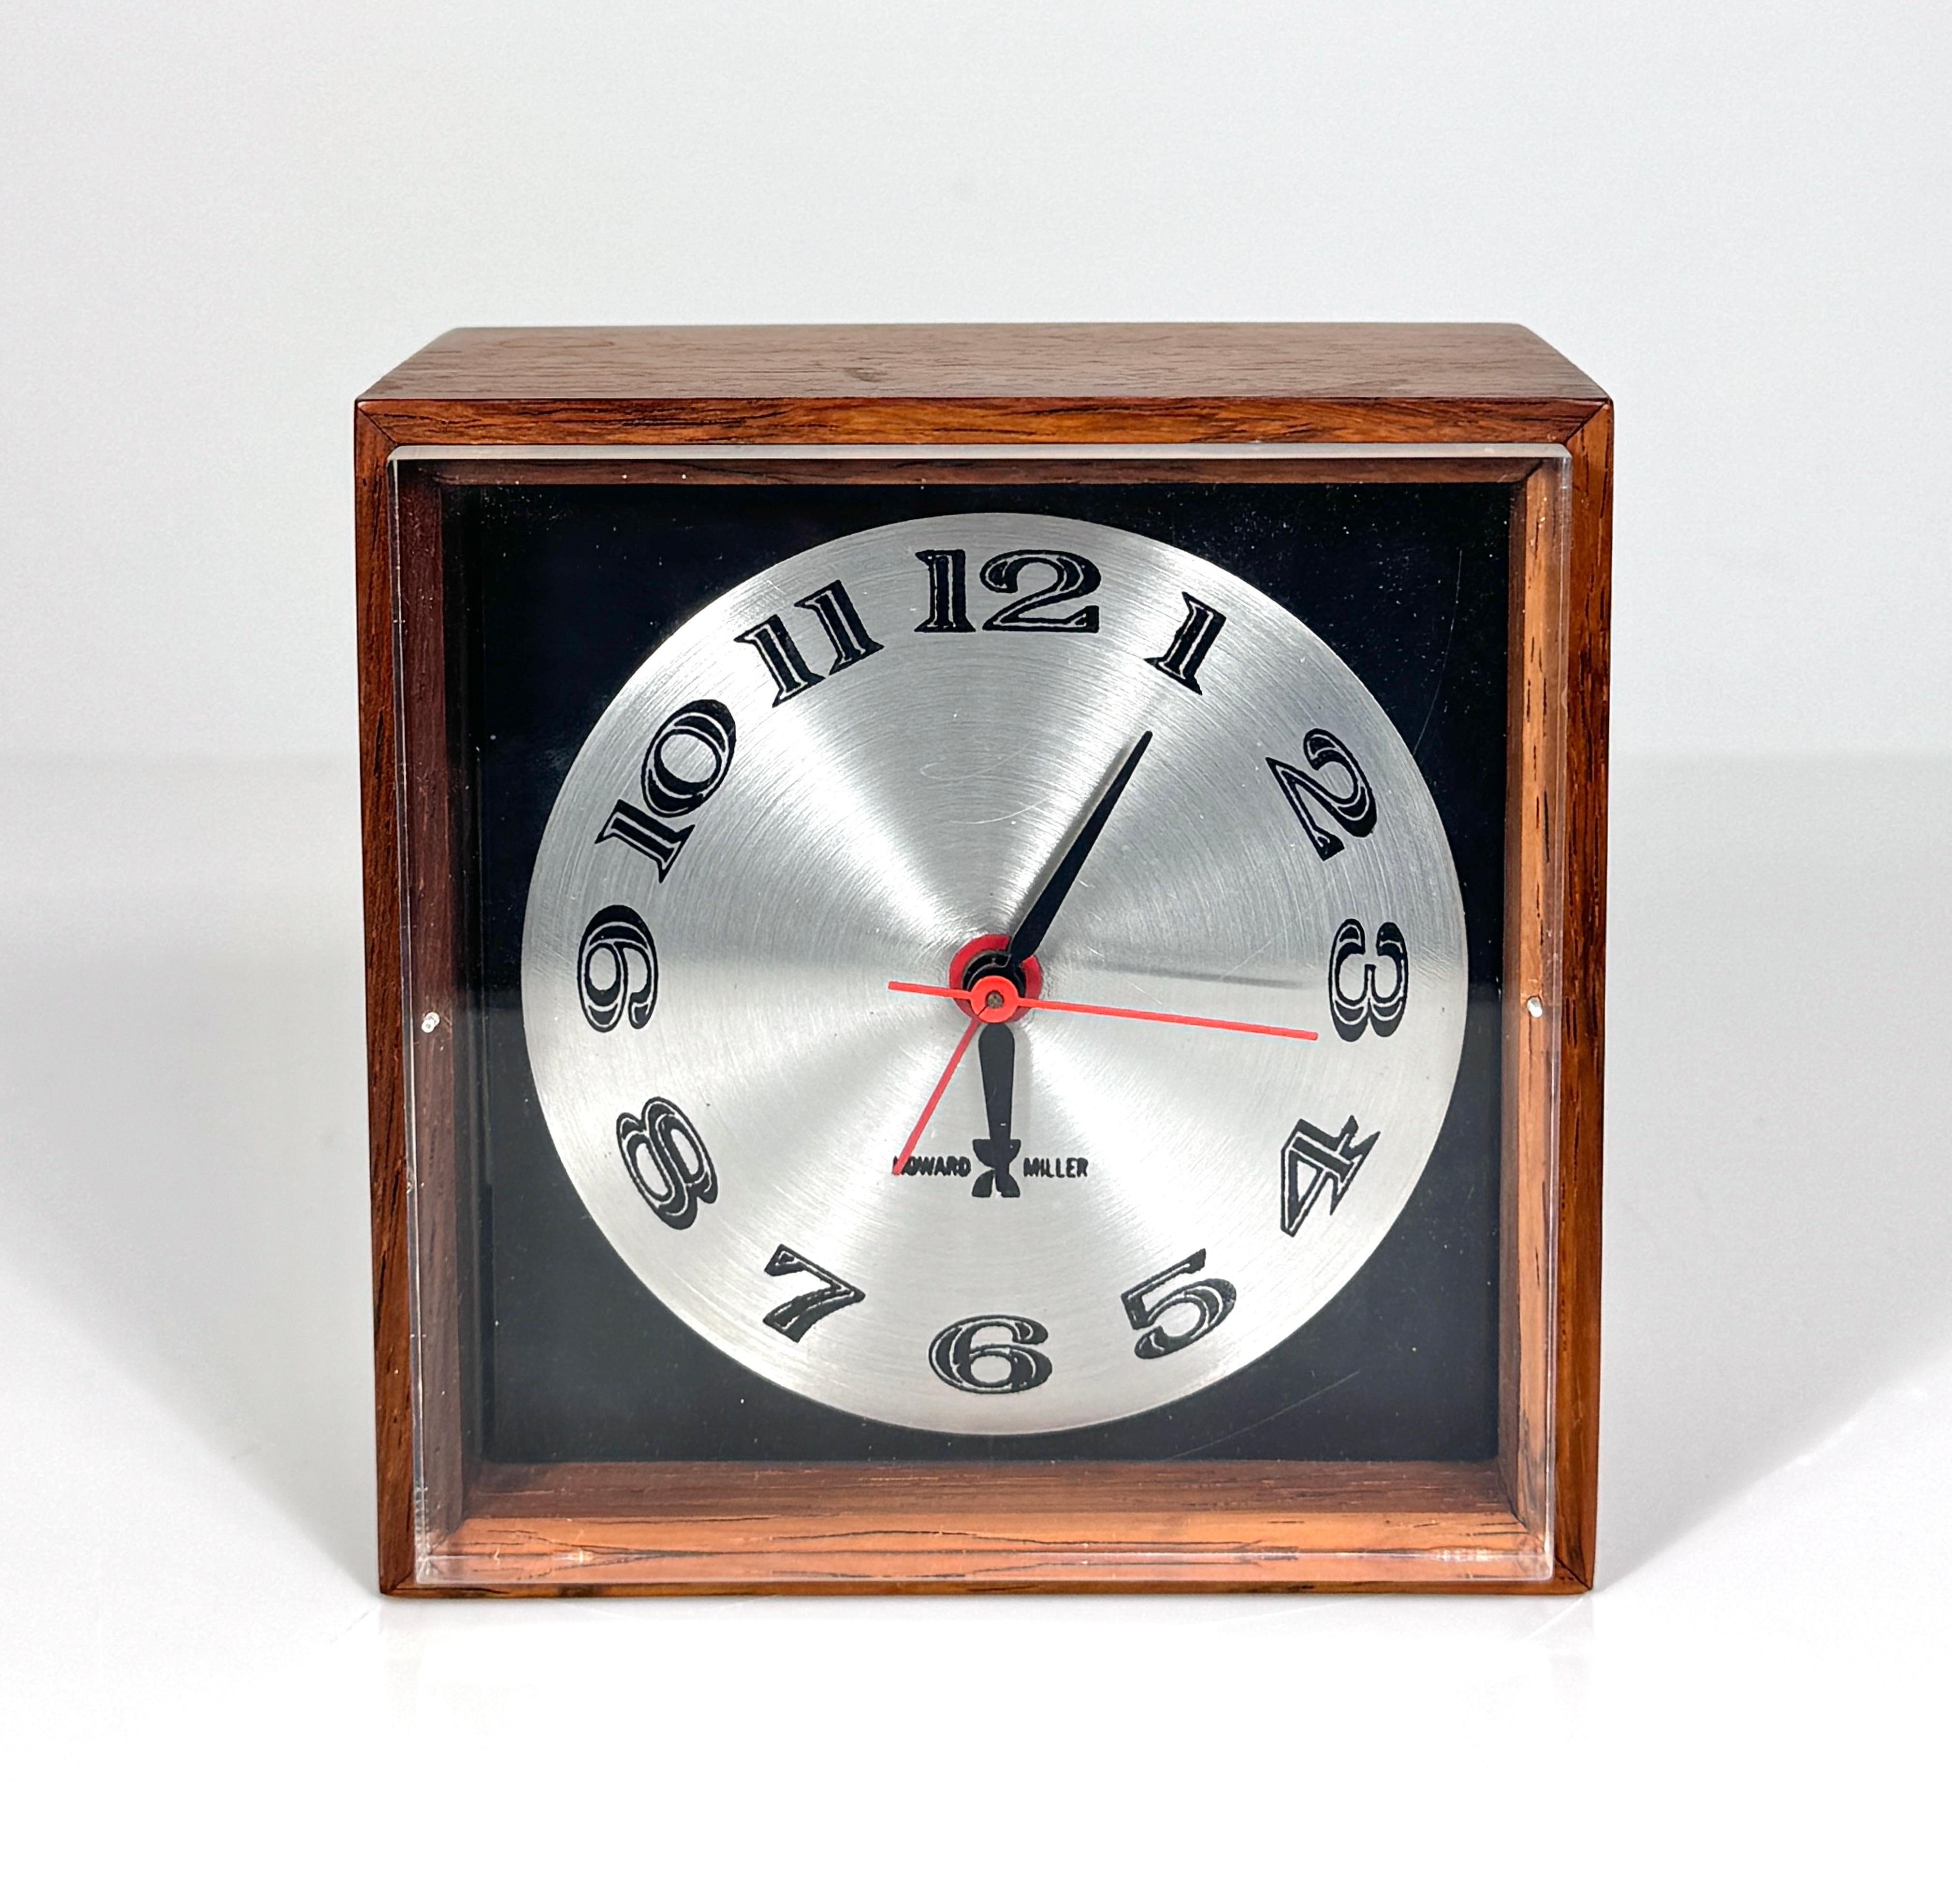 Arthur Umanoff model 645 alarm clock for Howard Miller circa late 1960s
Rosewood case with aluminum dial on a black background
Plug in electric movement with black hour and minute hands 
Red alarm set and sweeping second hand

Original label